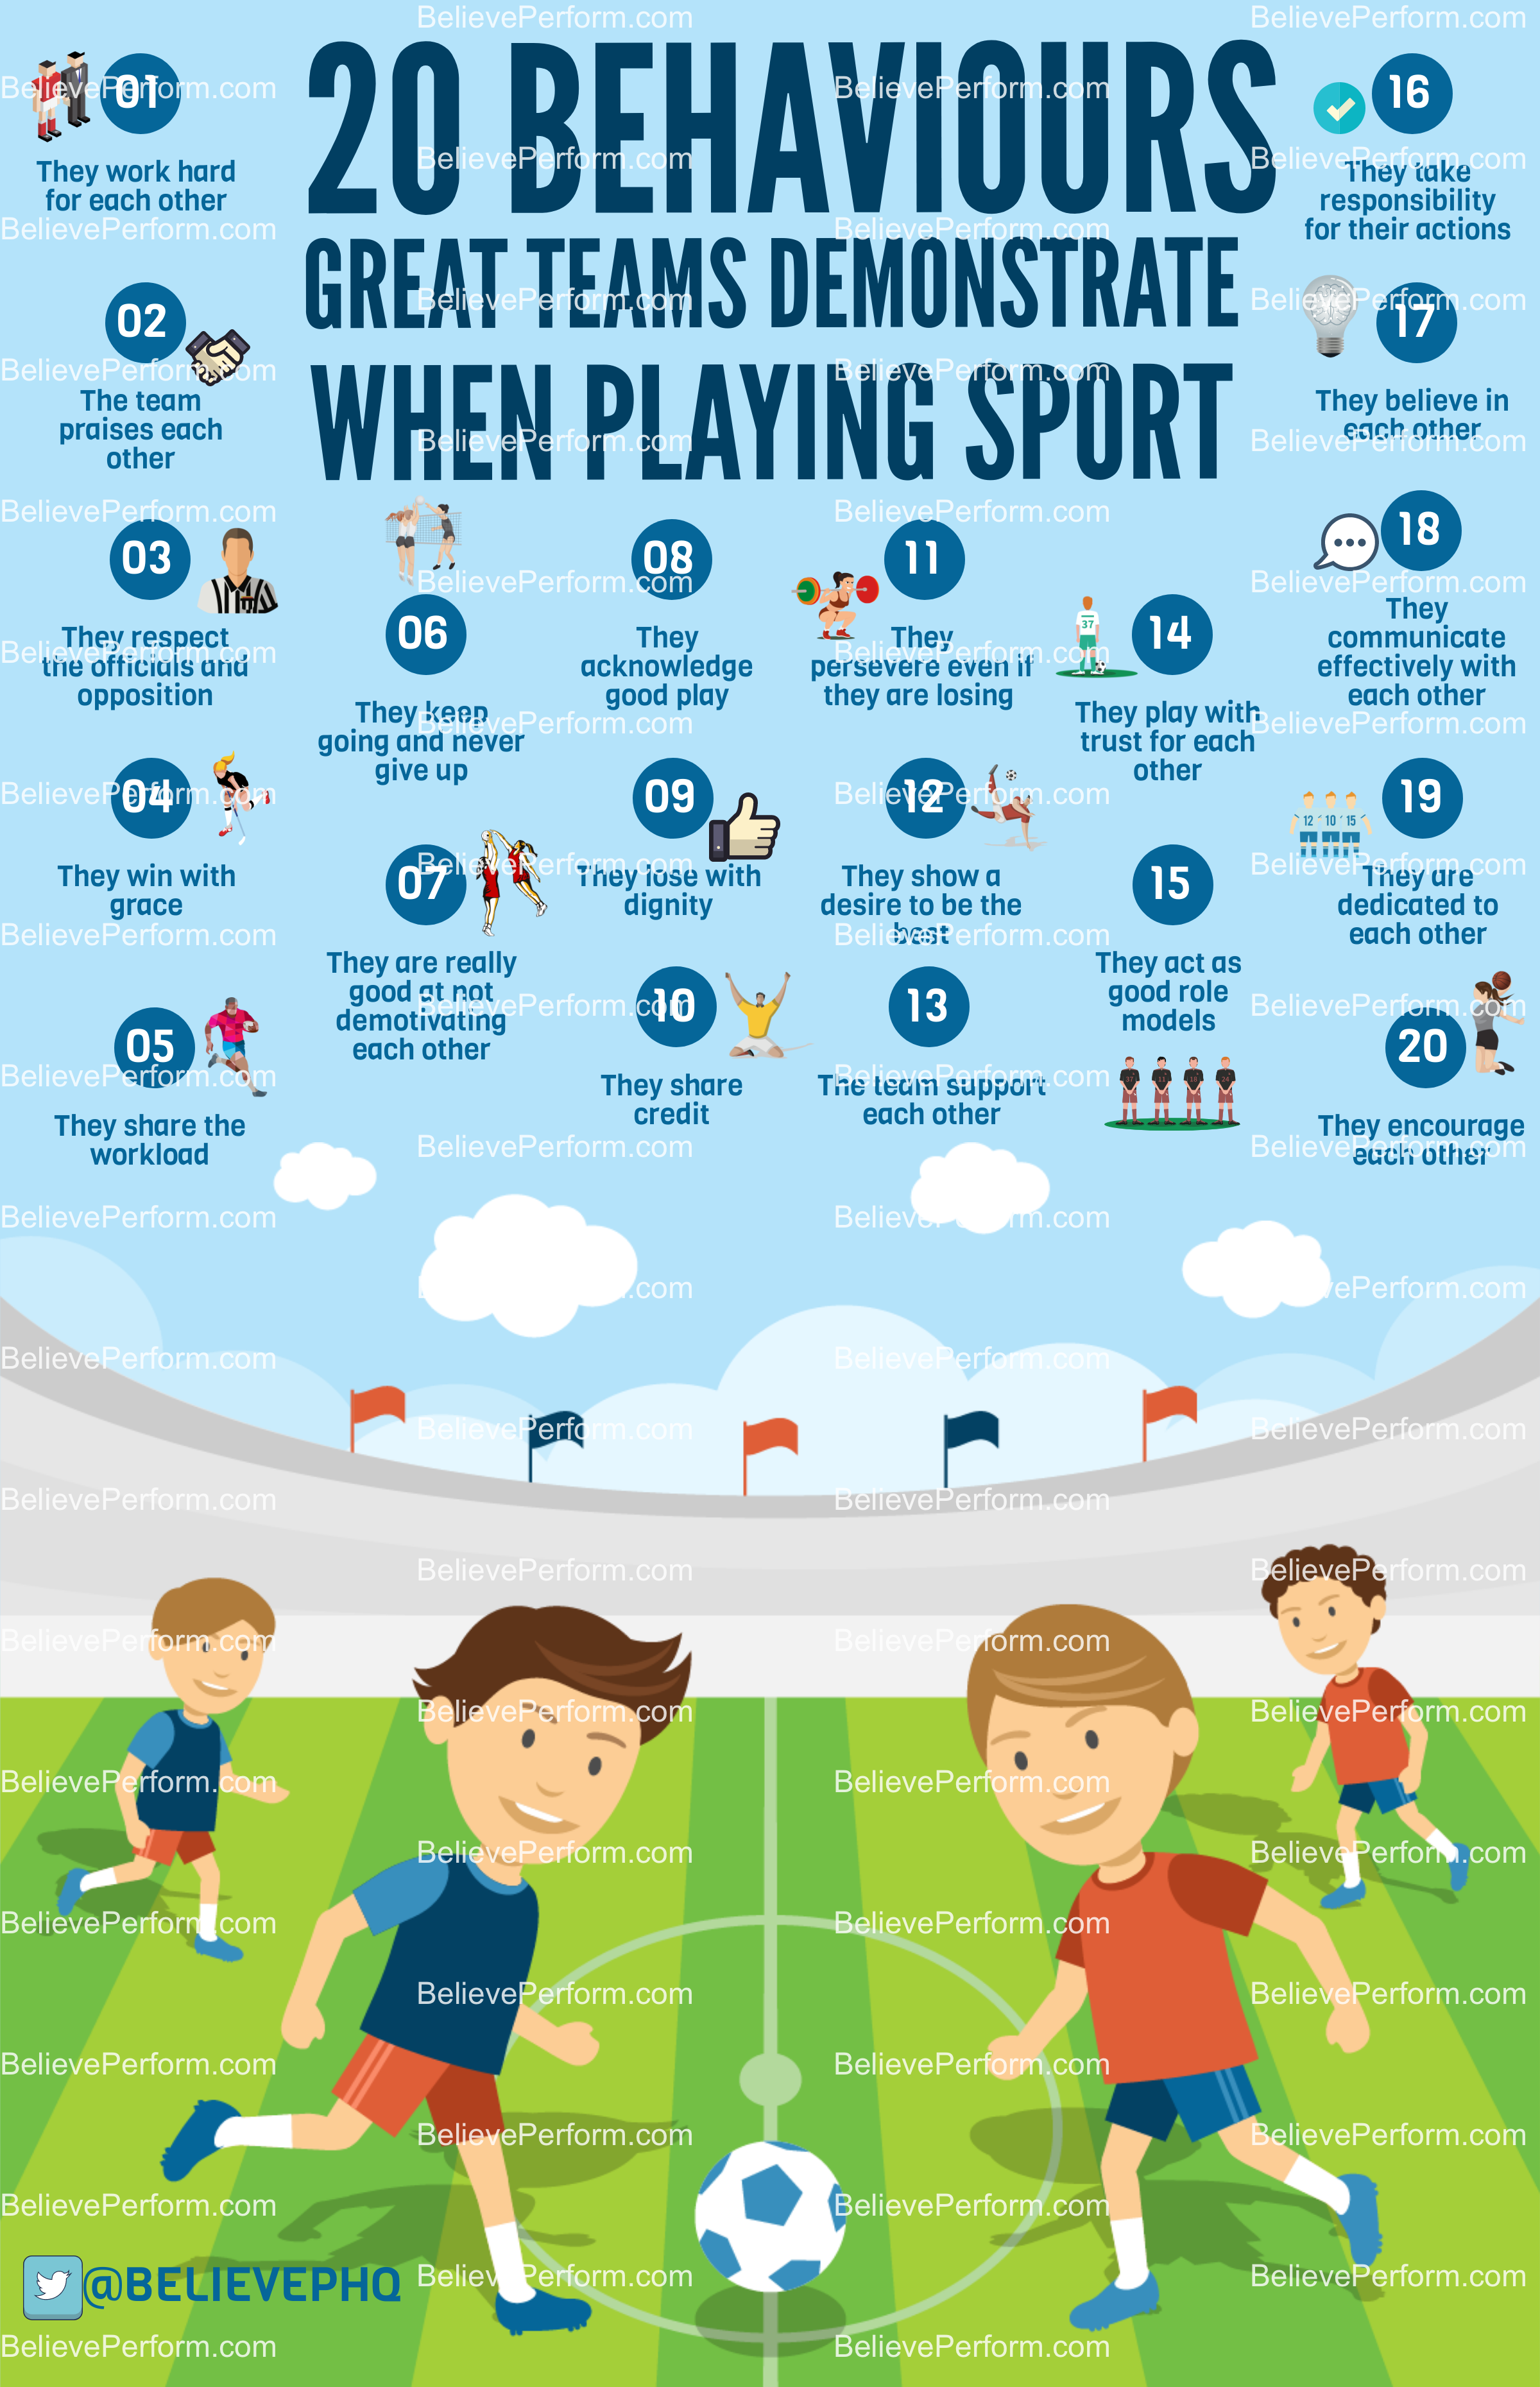 20 behaviours great teams demonstrate when playing sport - BelievePerform -  The UK's leading Sports Psychology Website